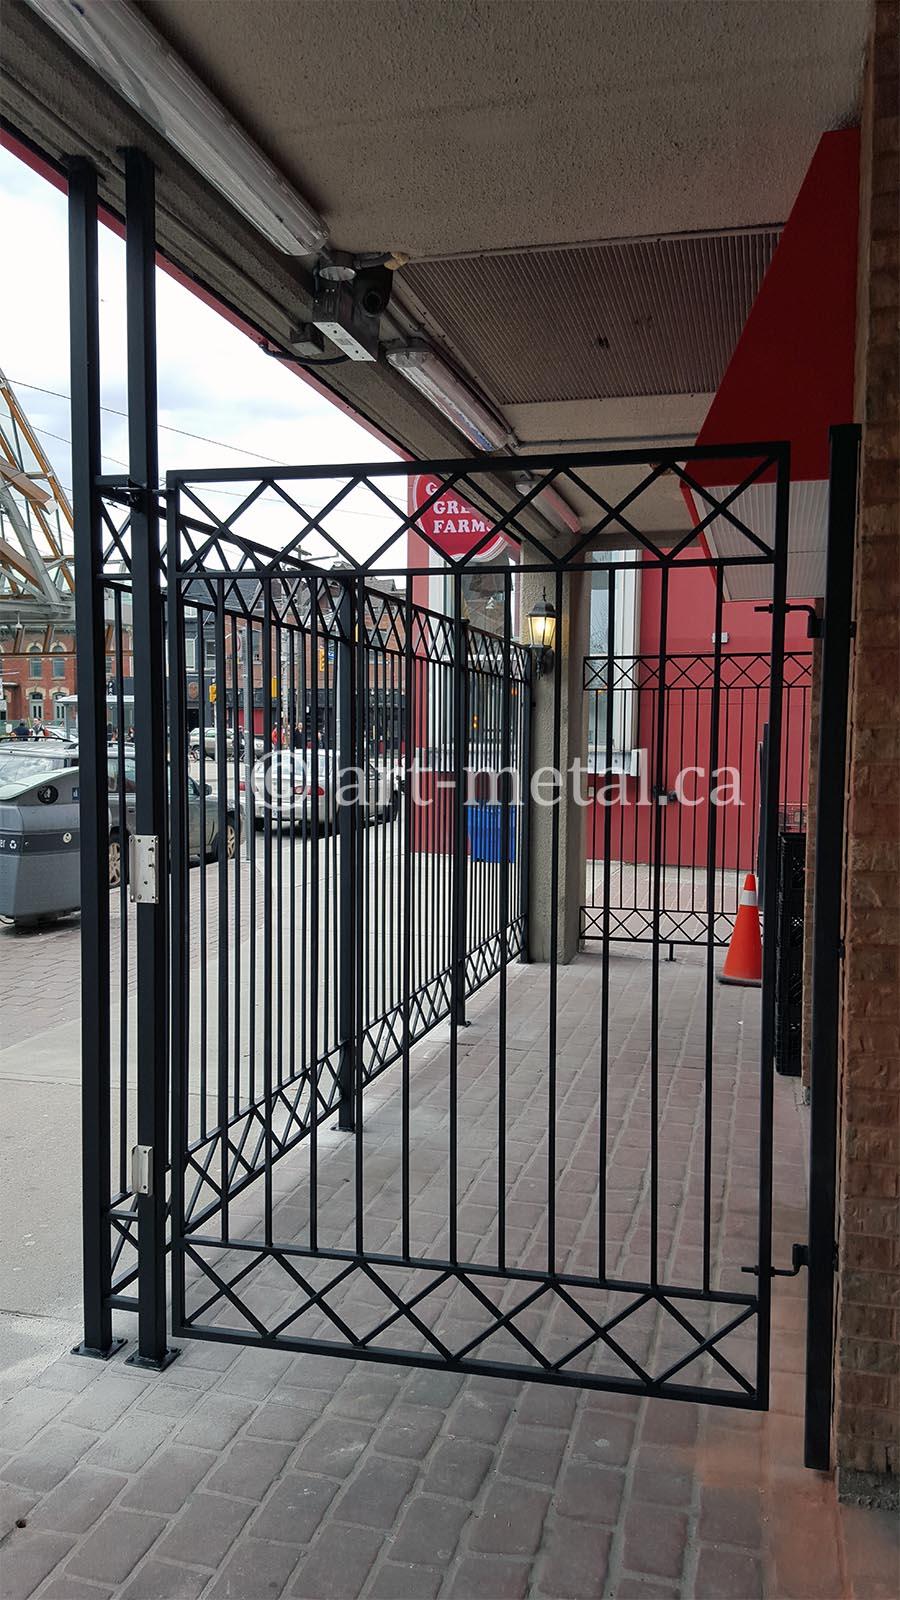 Creative Ornamental Fence Designs in Cast and Wrought Iron